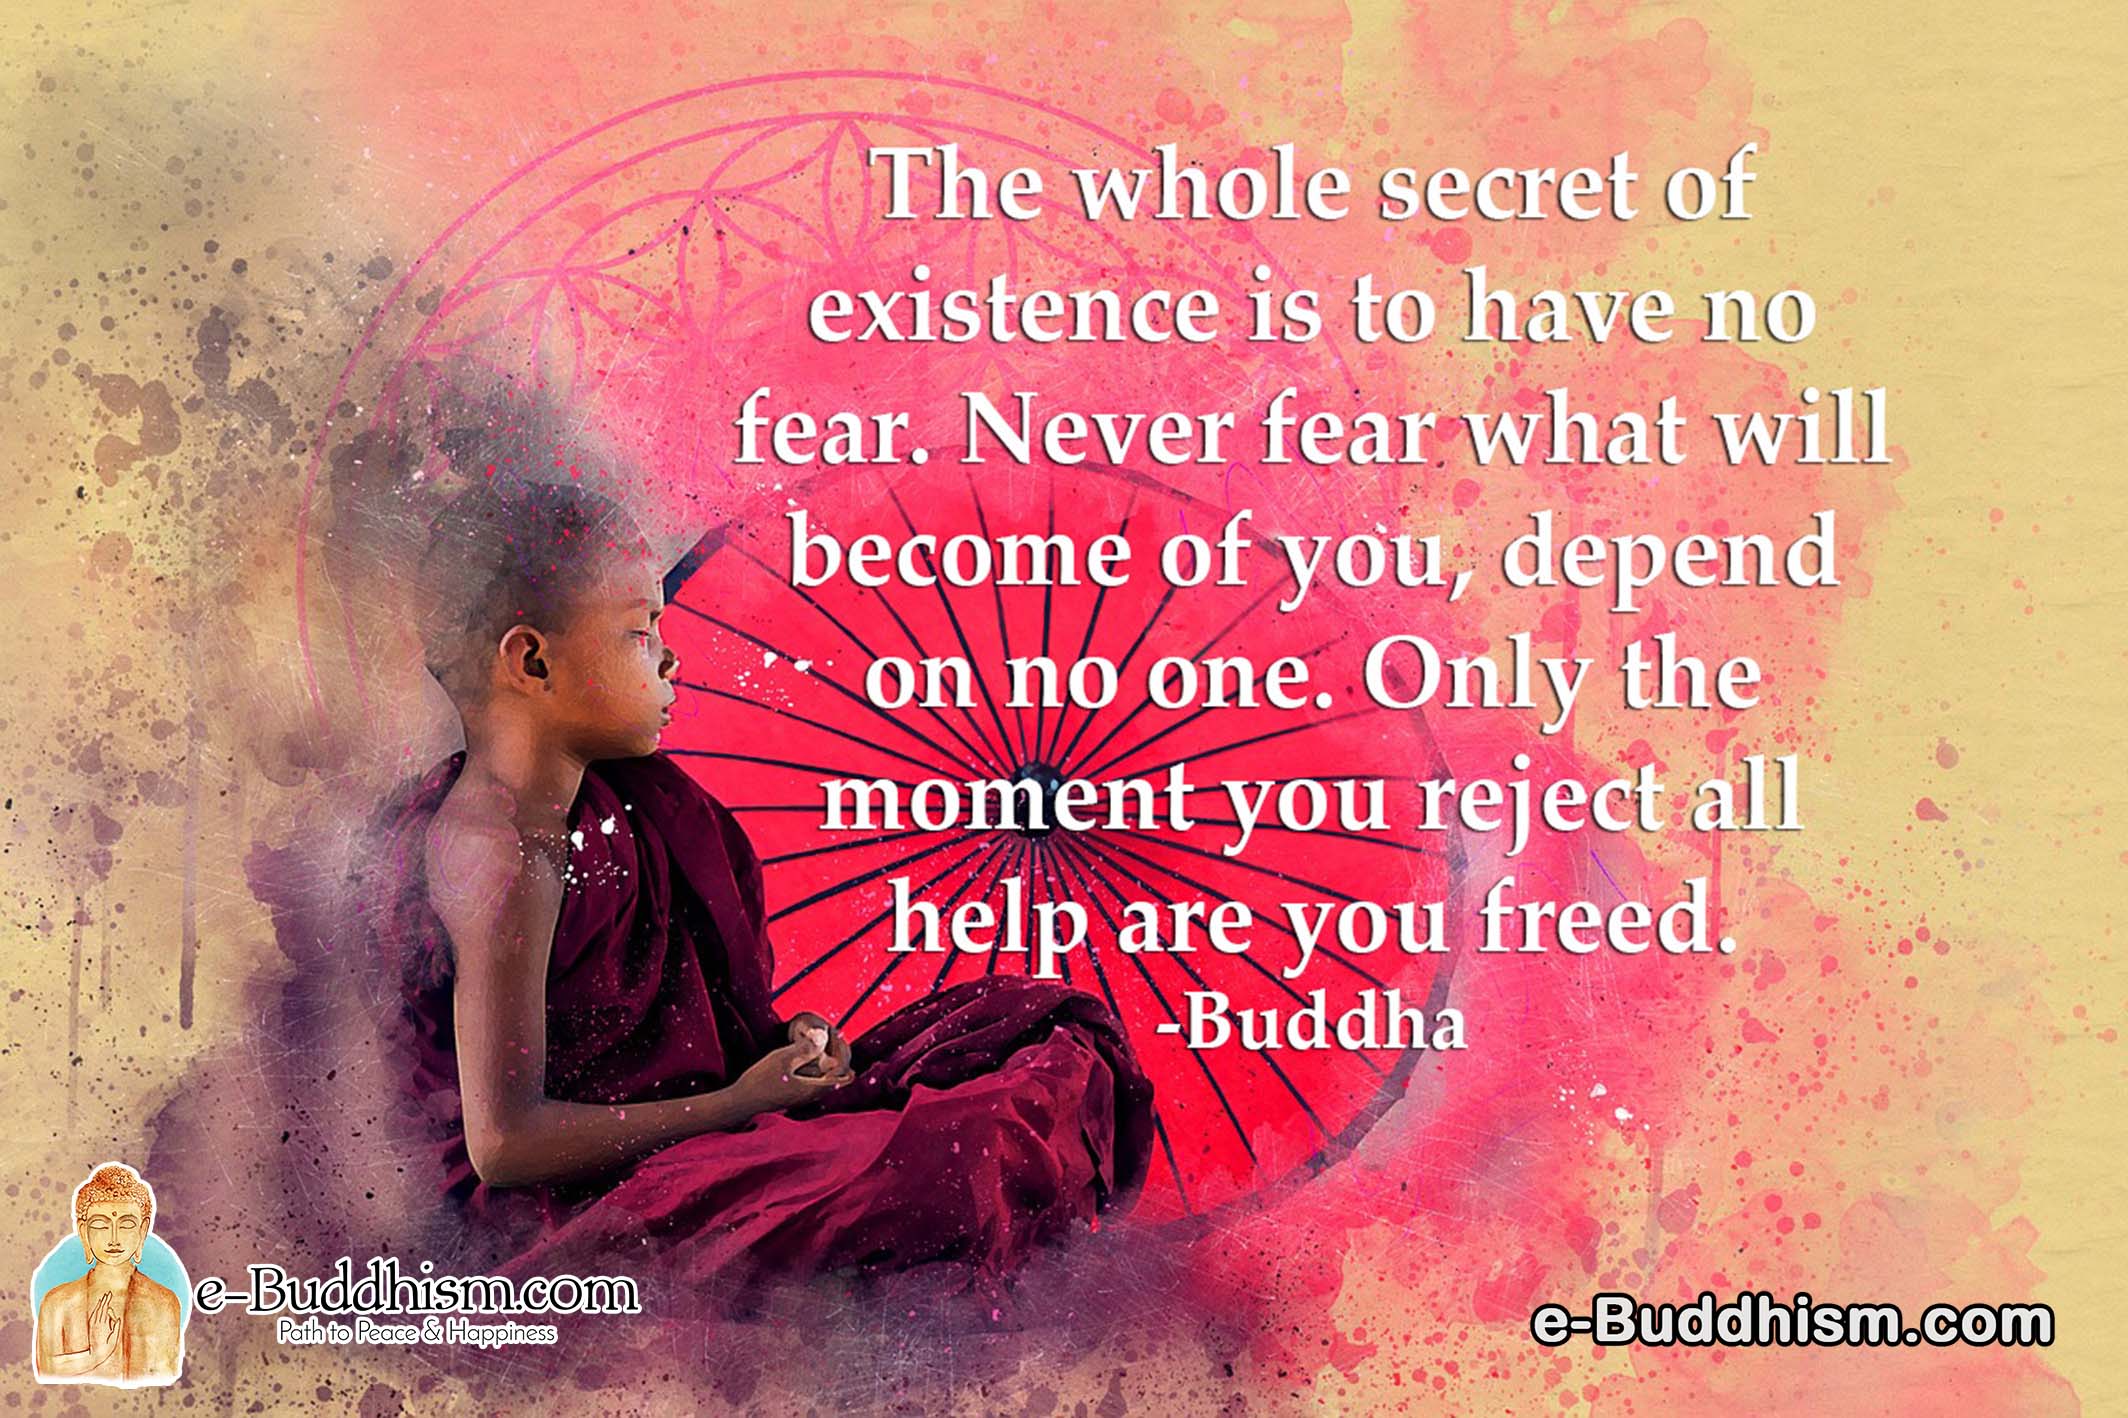 The whole secret of existence is to have no fear. Never fear what will become of you, depend on no one. Only the moment you reject all help are you freed. -Buddha